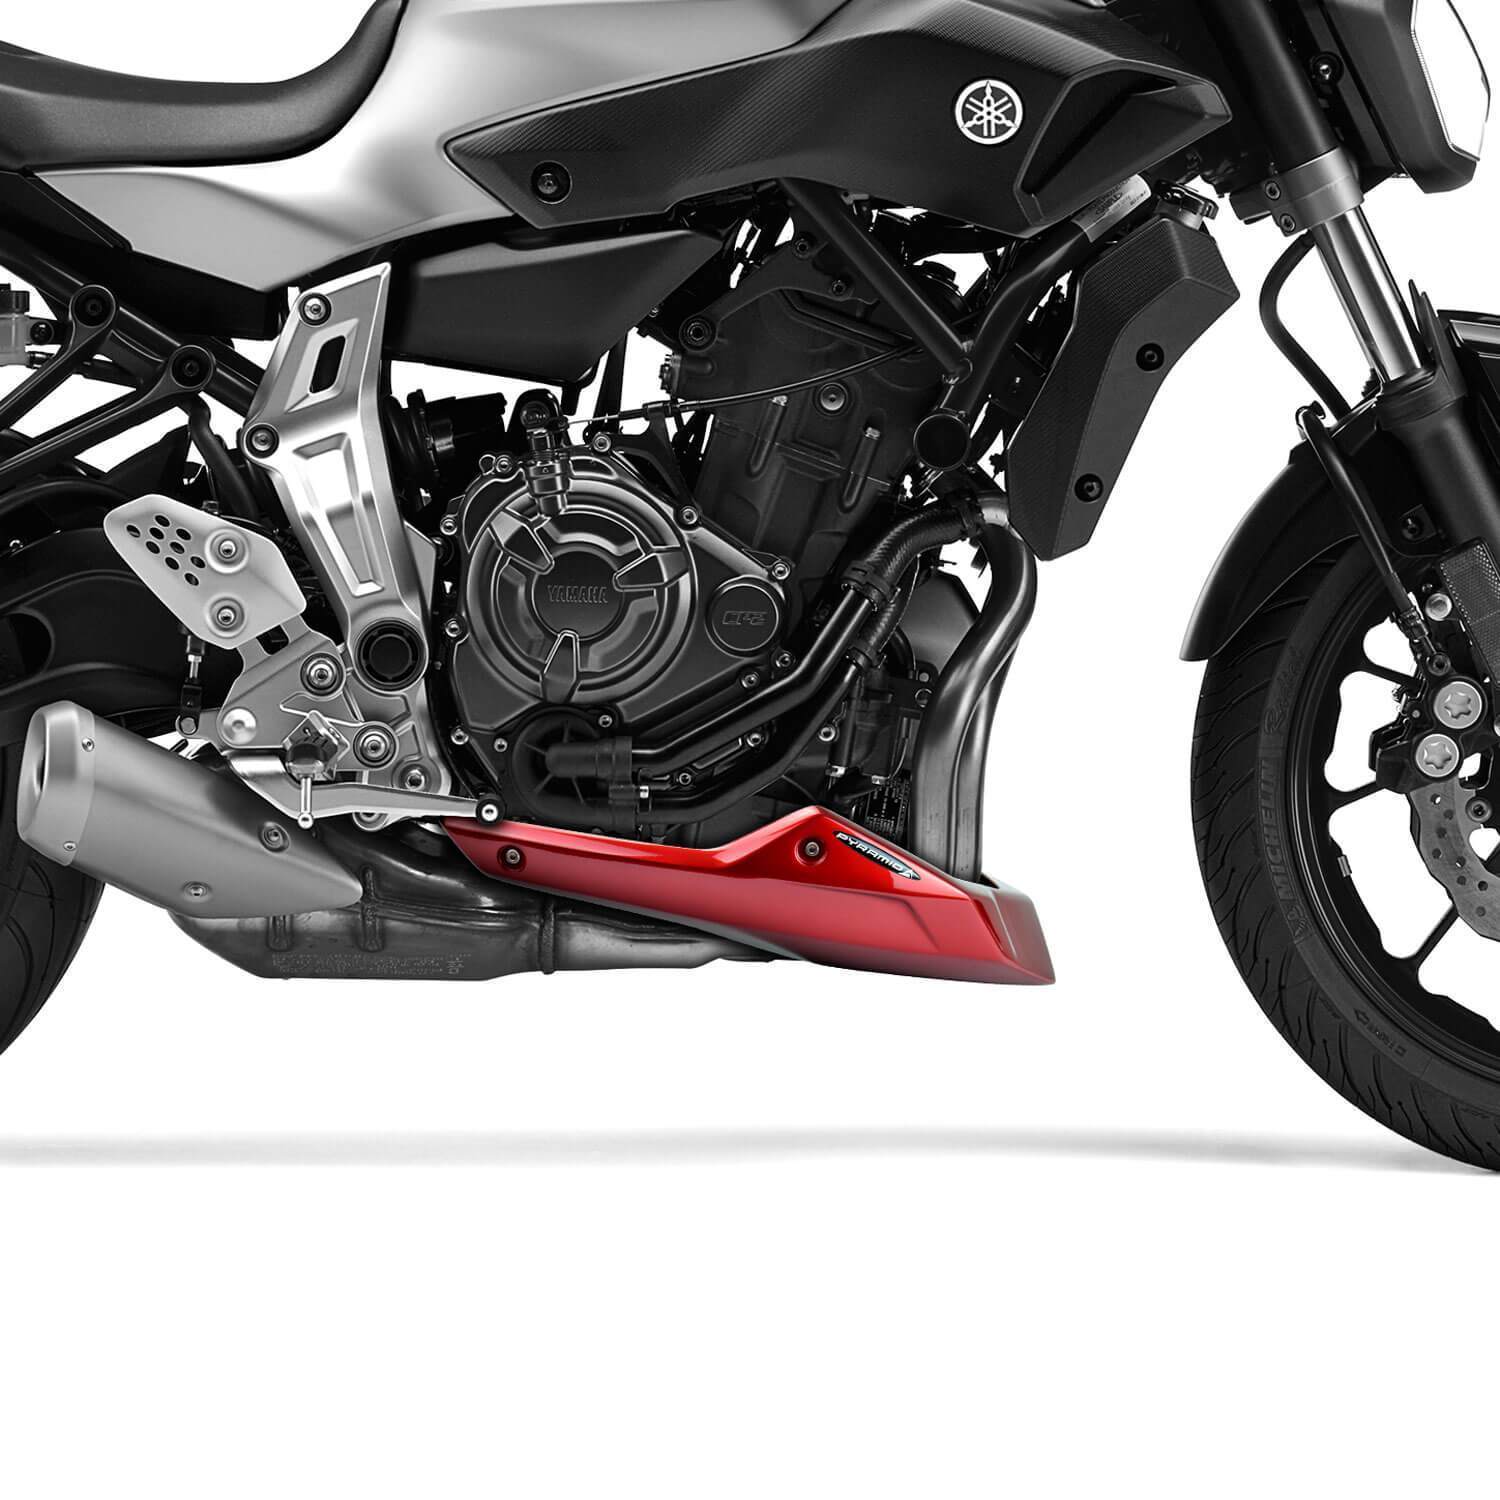 Pyramid Belly Pan | Metallic Red (Lava Red) | Yamaha MT-07 2013>Current-22136K-Belly Pans-Pyramid Plastics